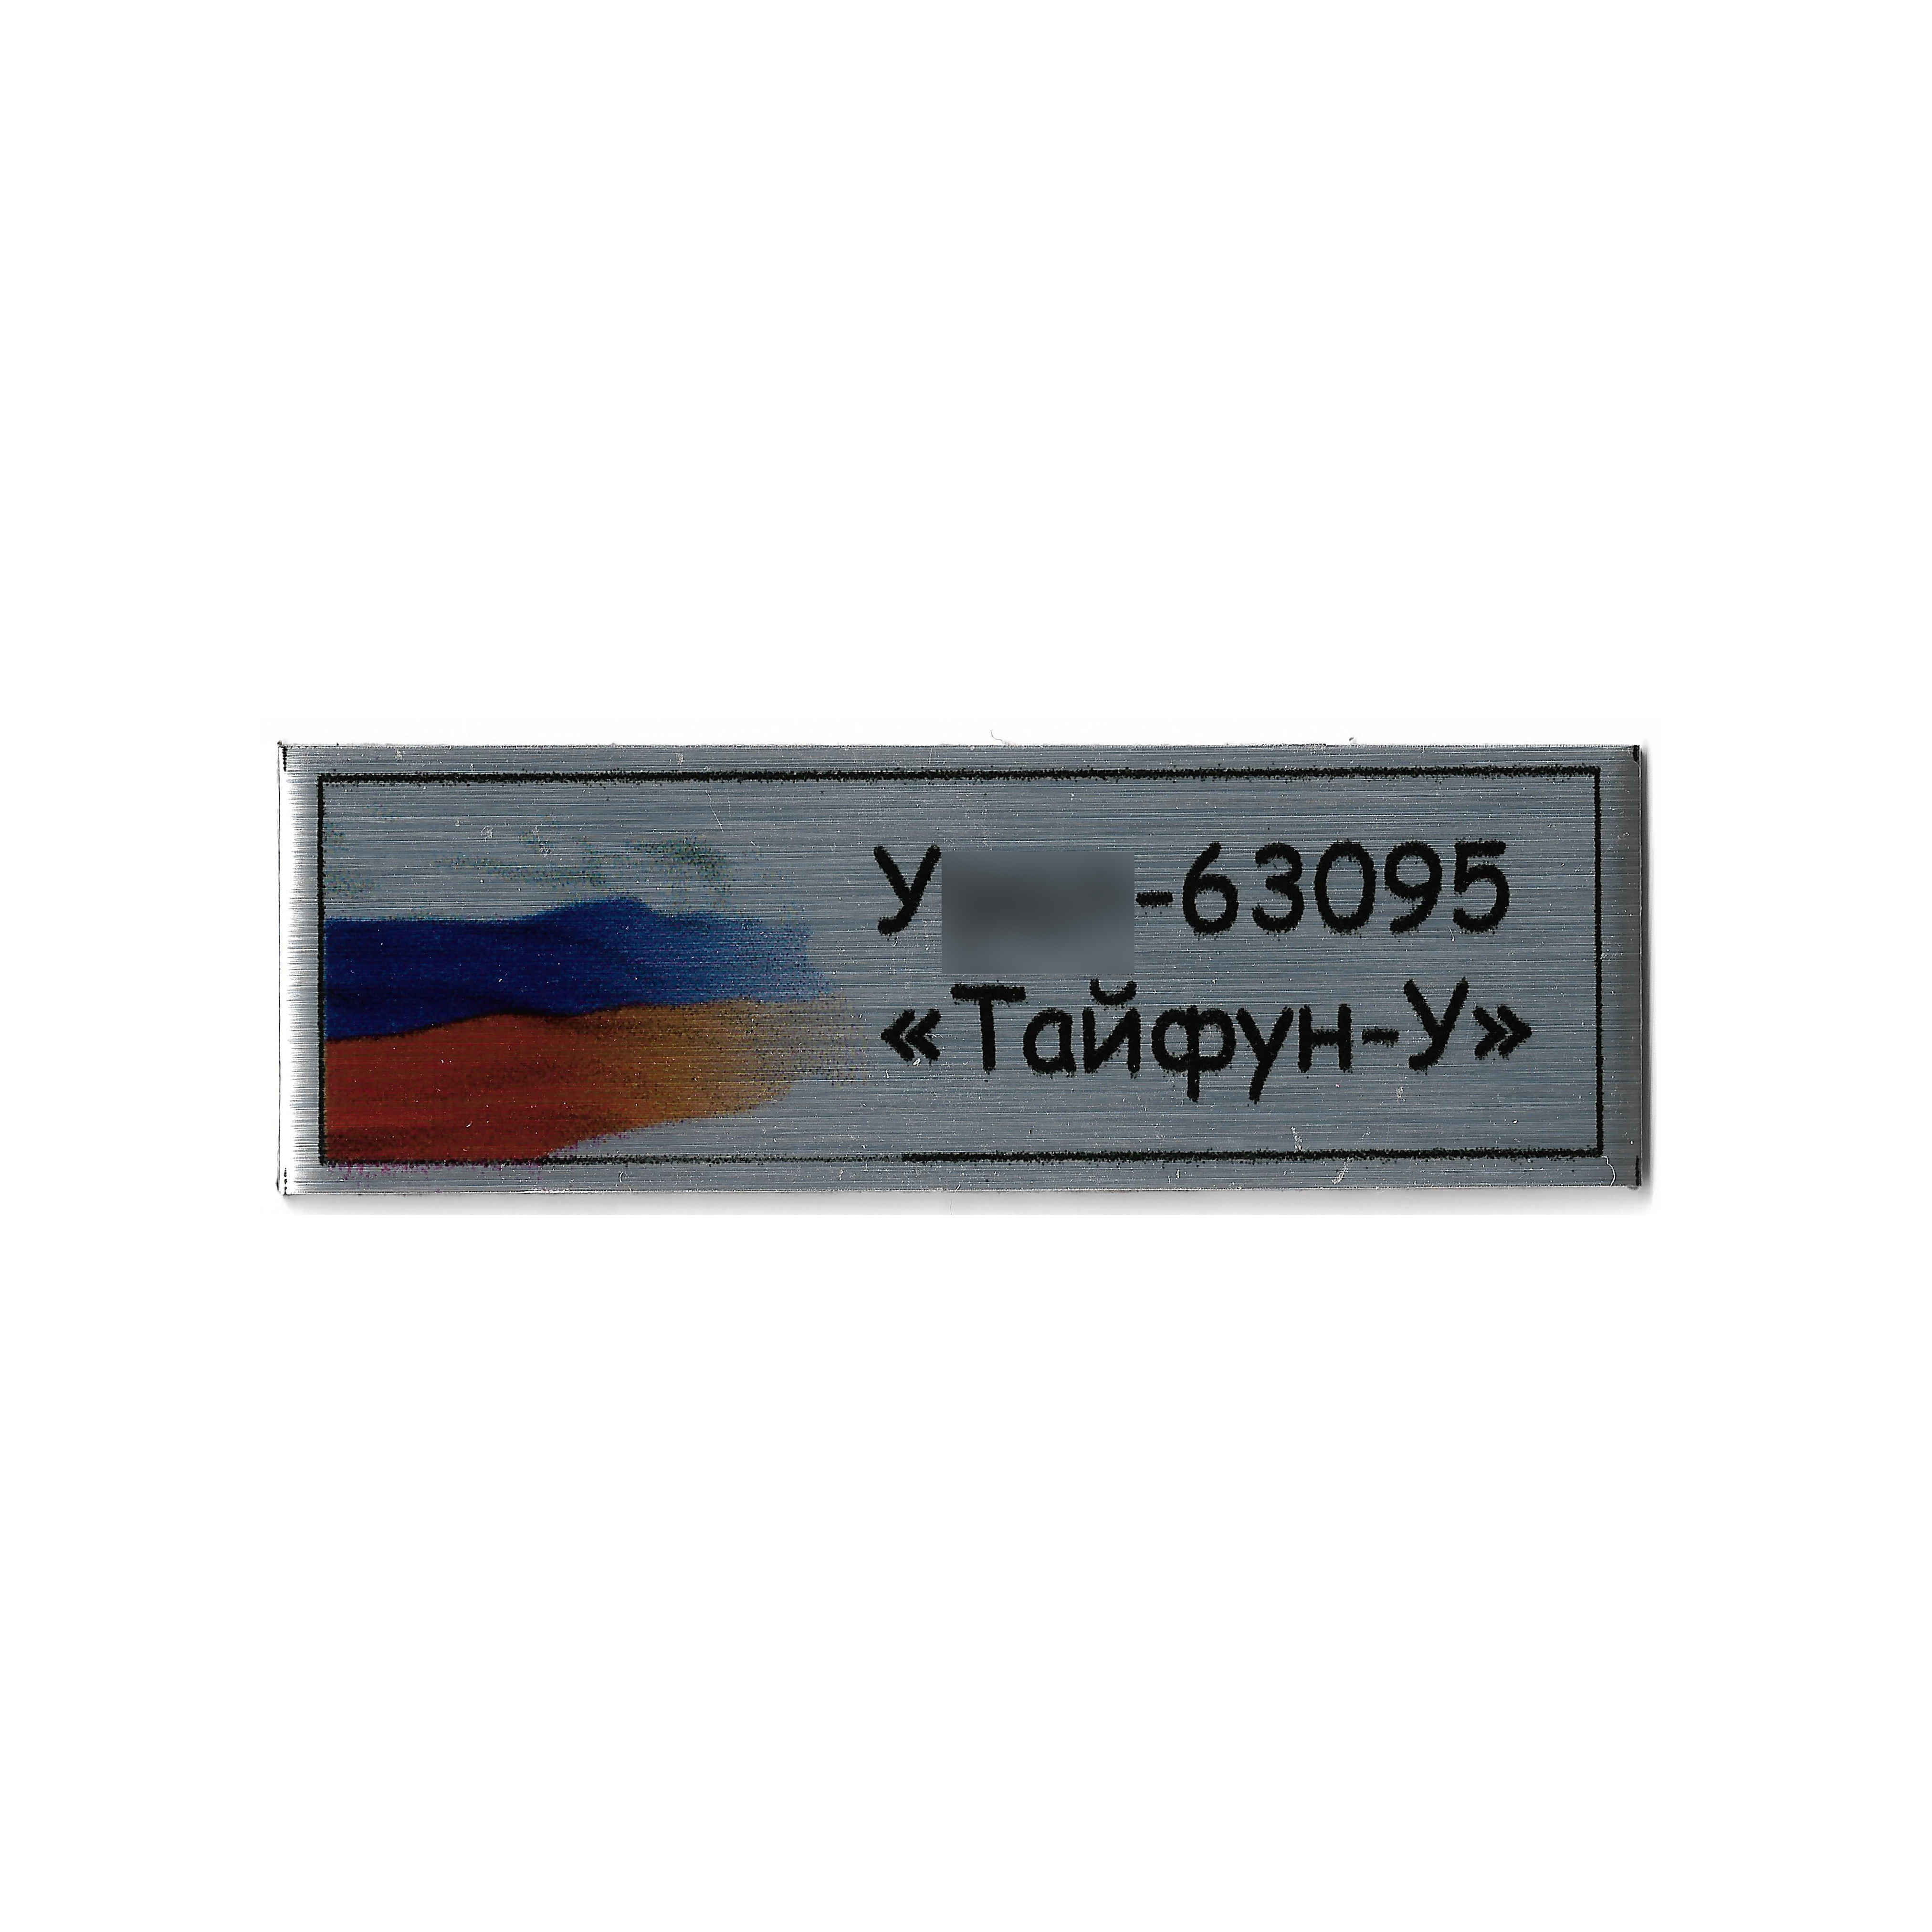 T340 Plate Plate for U-63095 